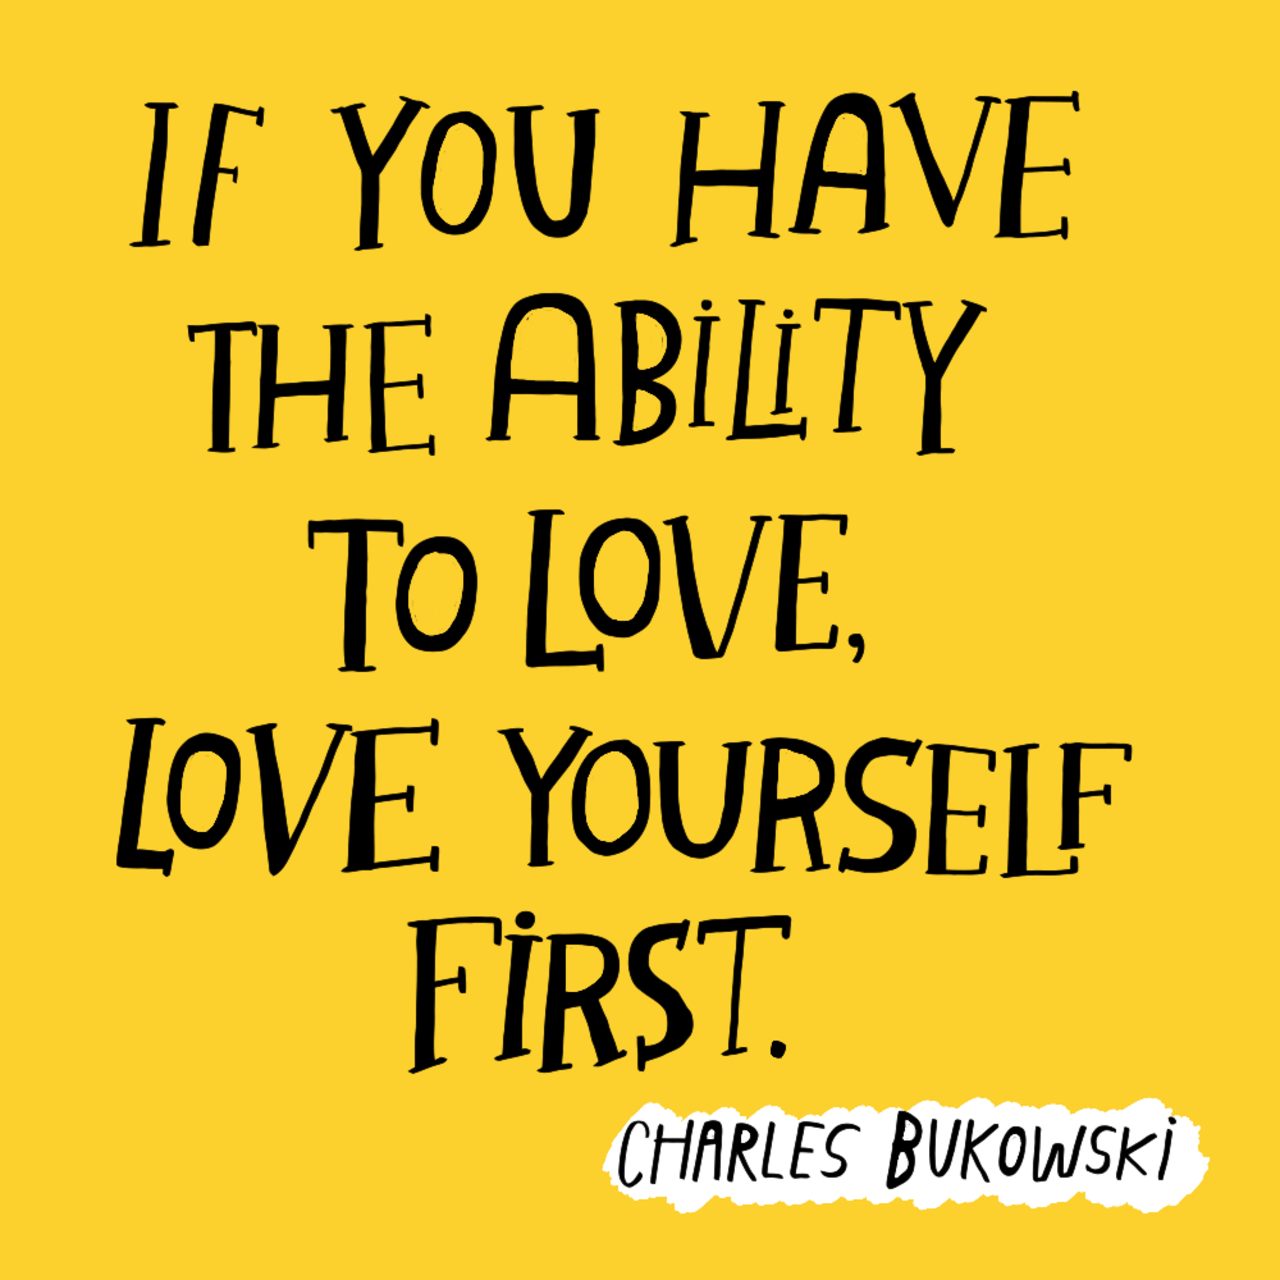 Love Yourself First Charles Bukowski Daily Quotes Sayings Pictures